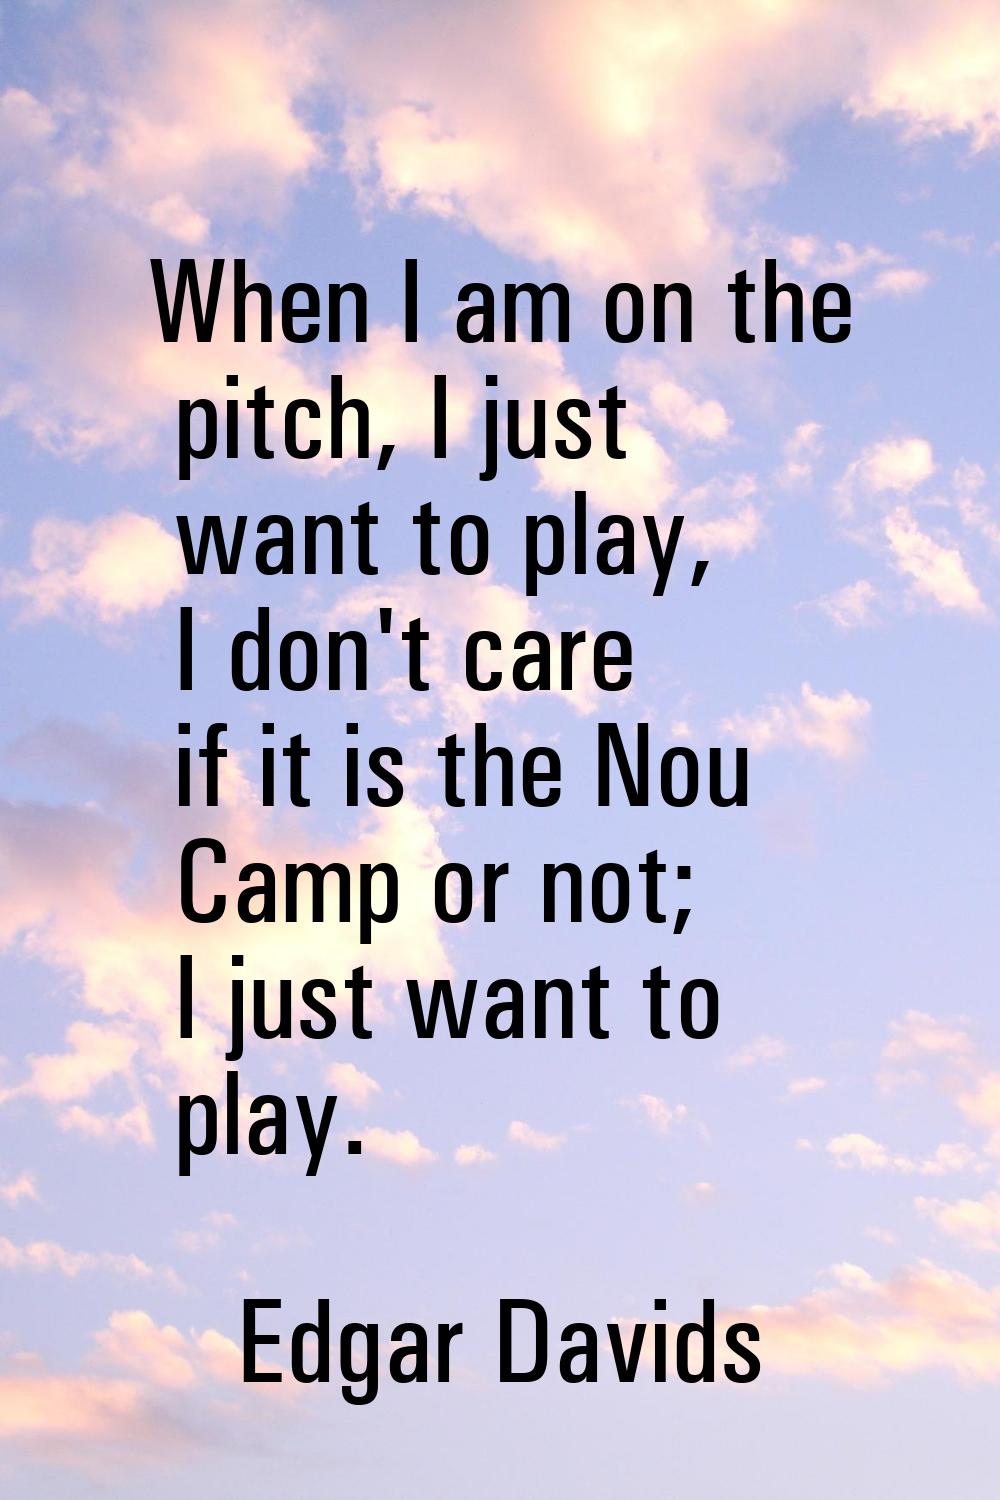 When I am on the pitch, I just want to play, I don't care if it is the Nou Camp or not; I just want